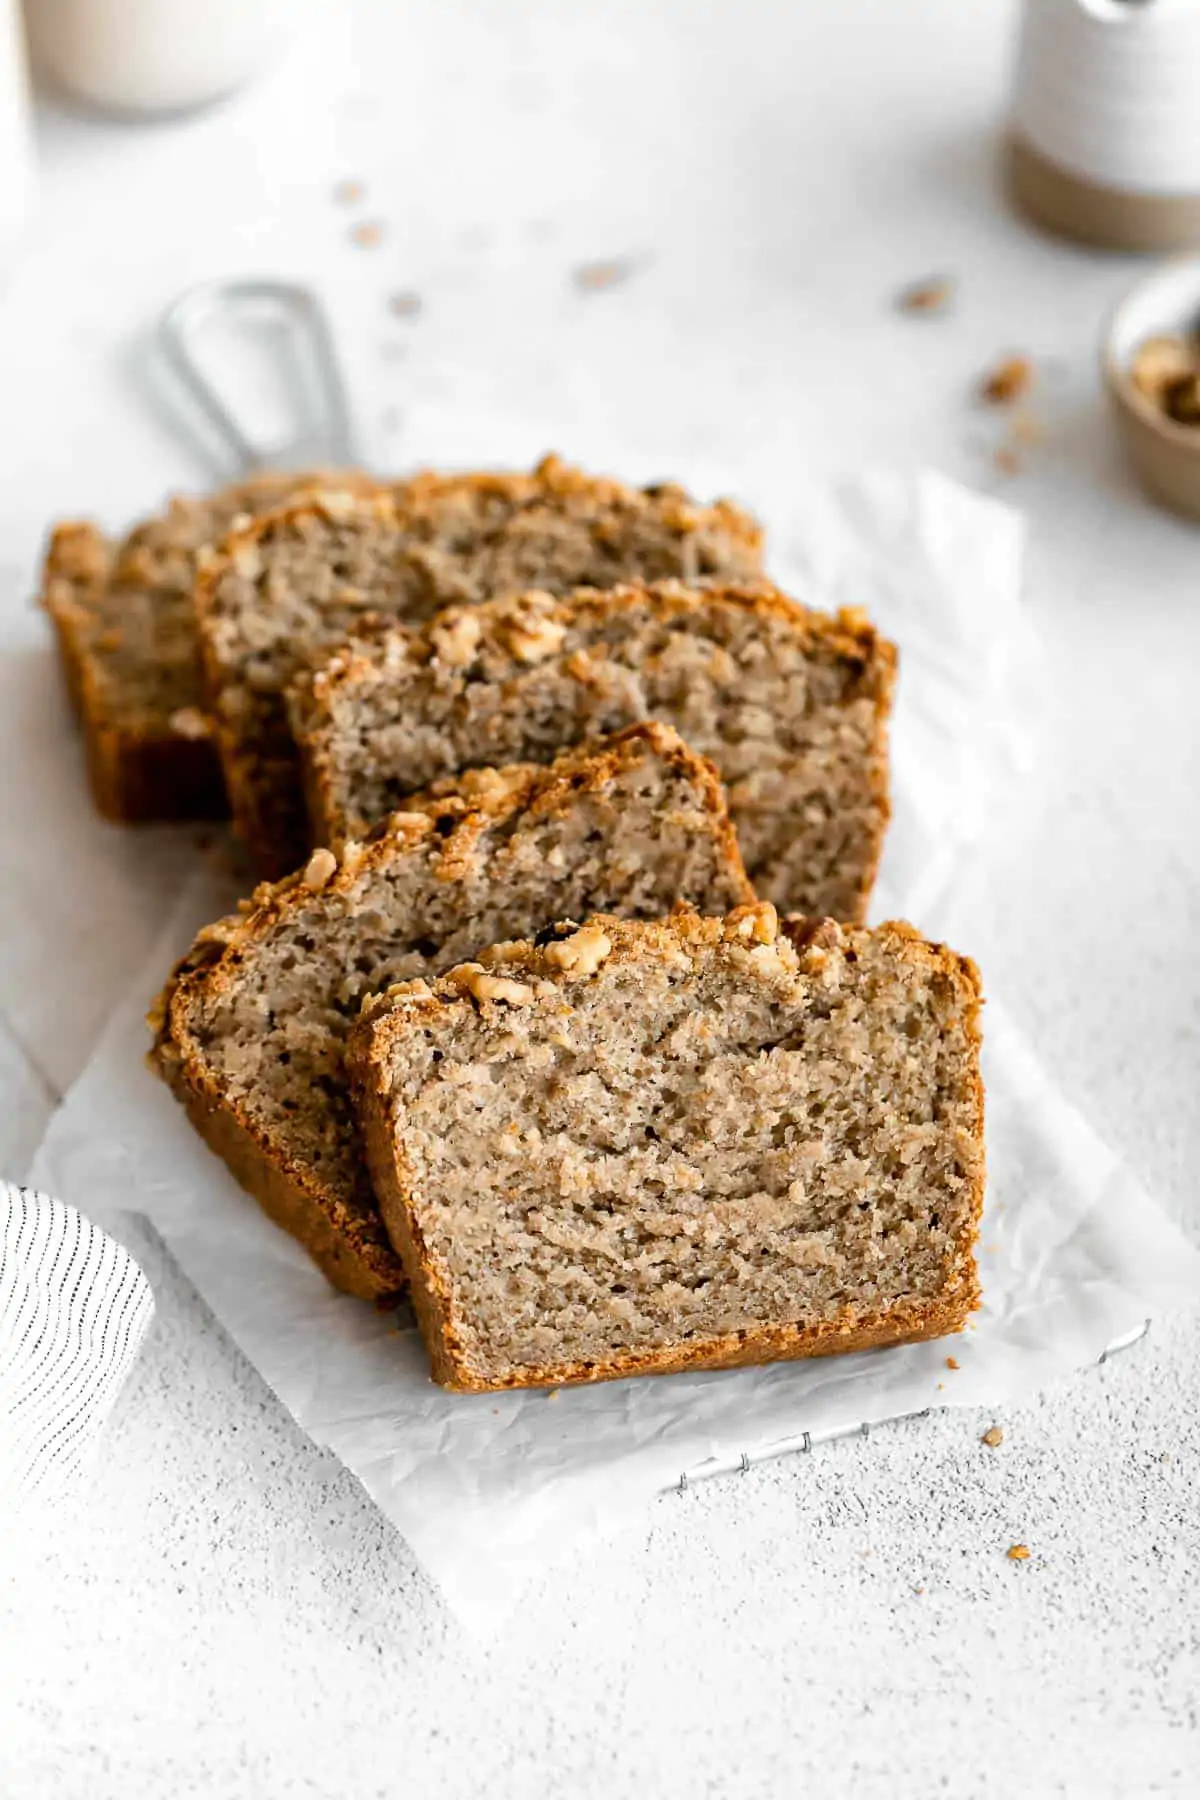 five slices of gluten free banana bread with walnuts